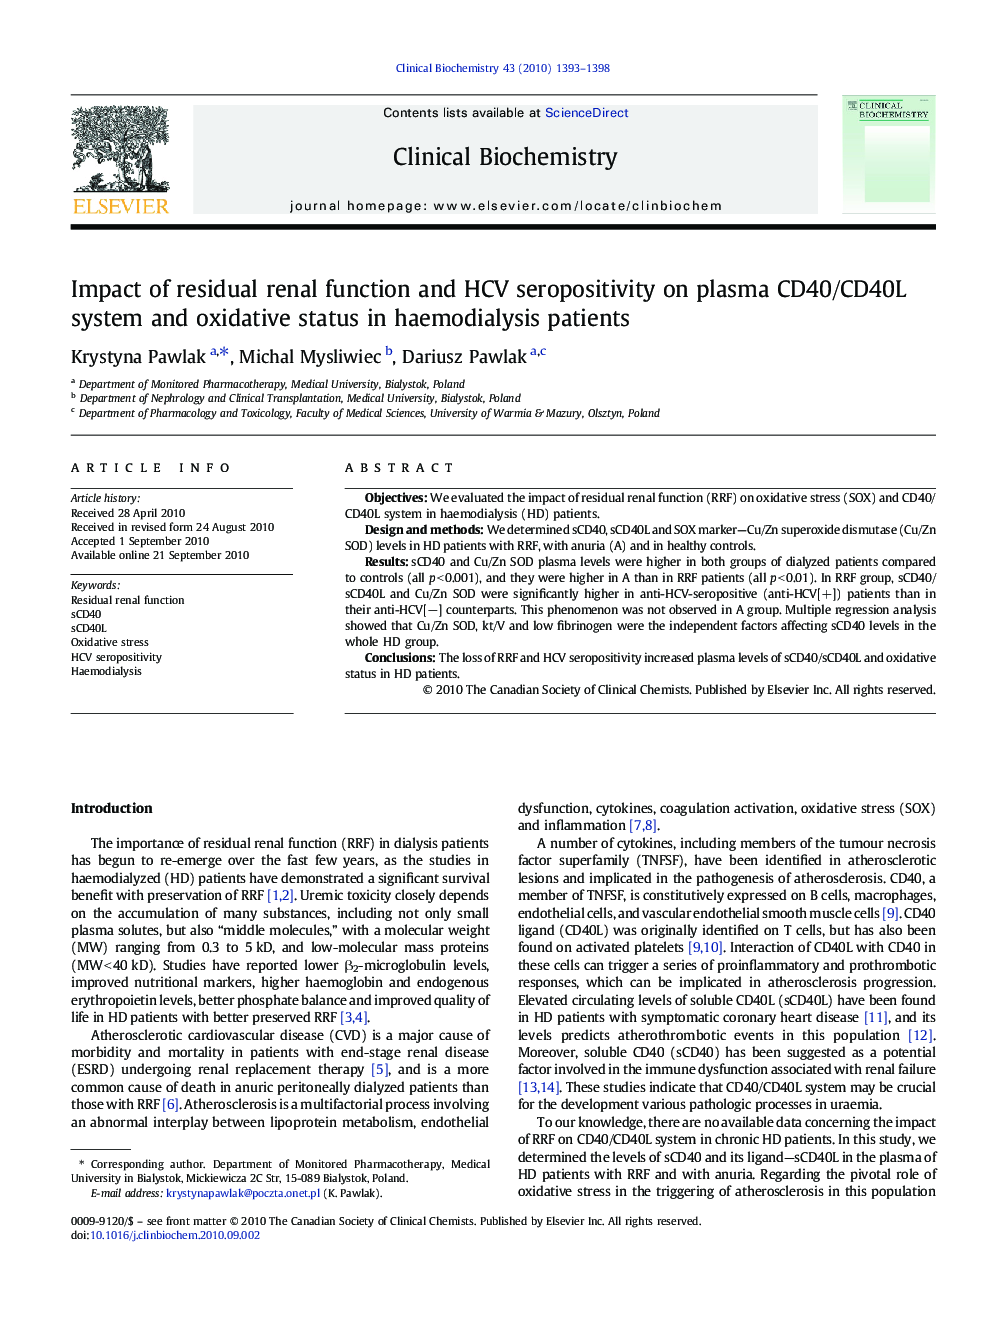 Impact of residual renal function and HCV seropositivity on plasma CD40/CD40L system and oxidative status in haemodialysis patients